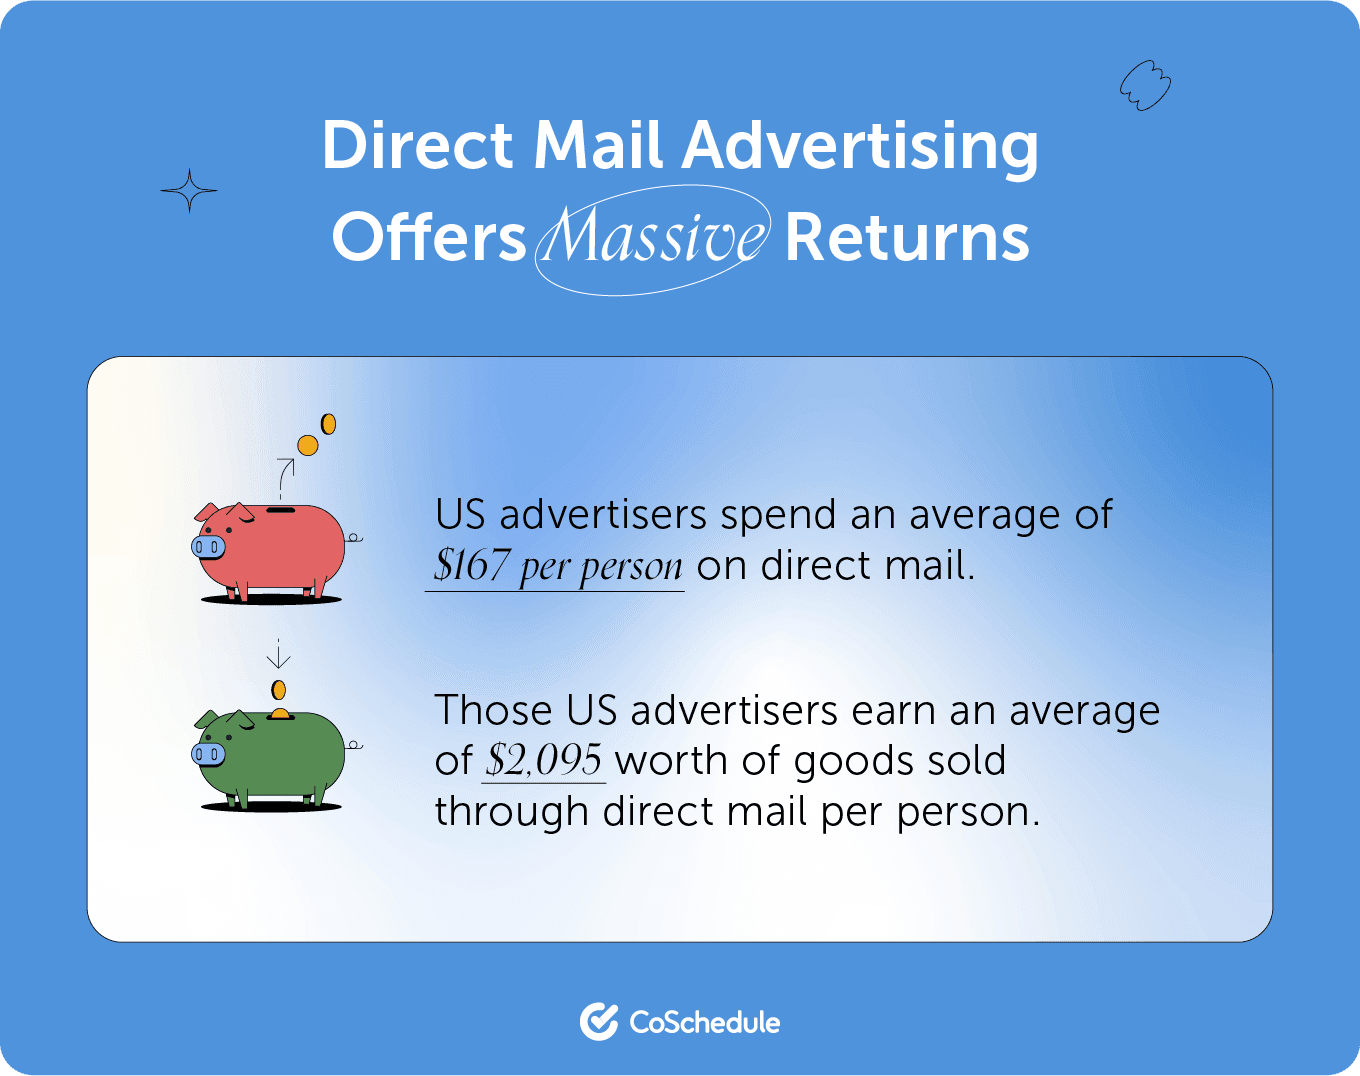 Direct mail advertising offers massive returns